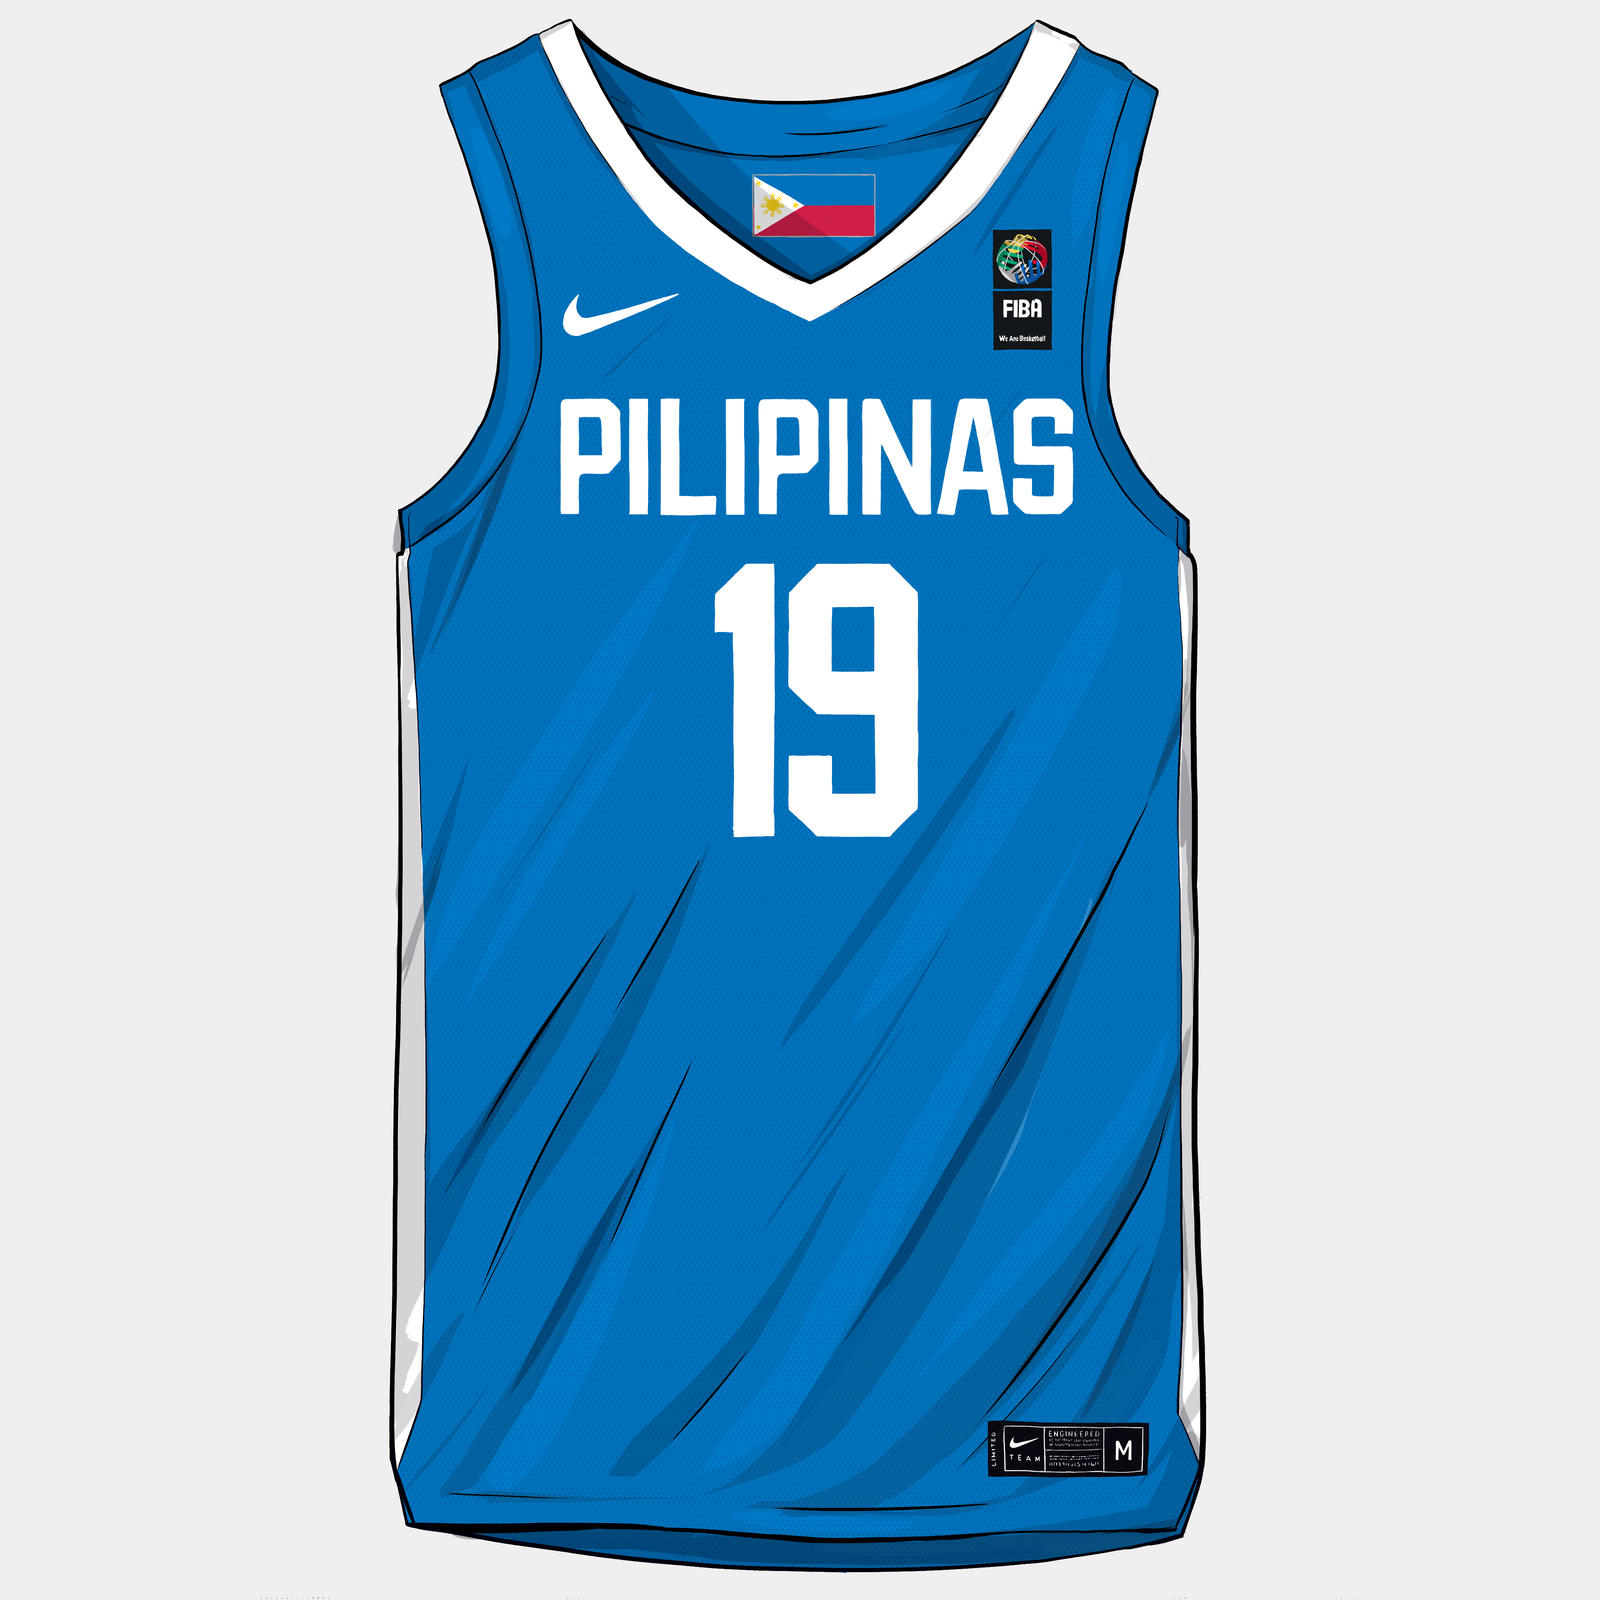 Jersey for the FIBA World Cup 2019 